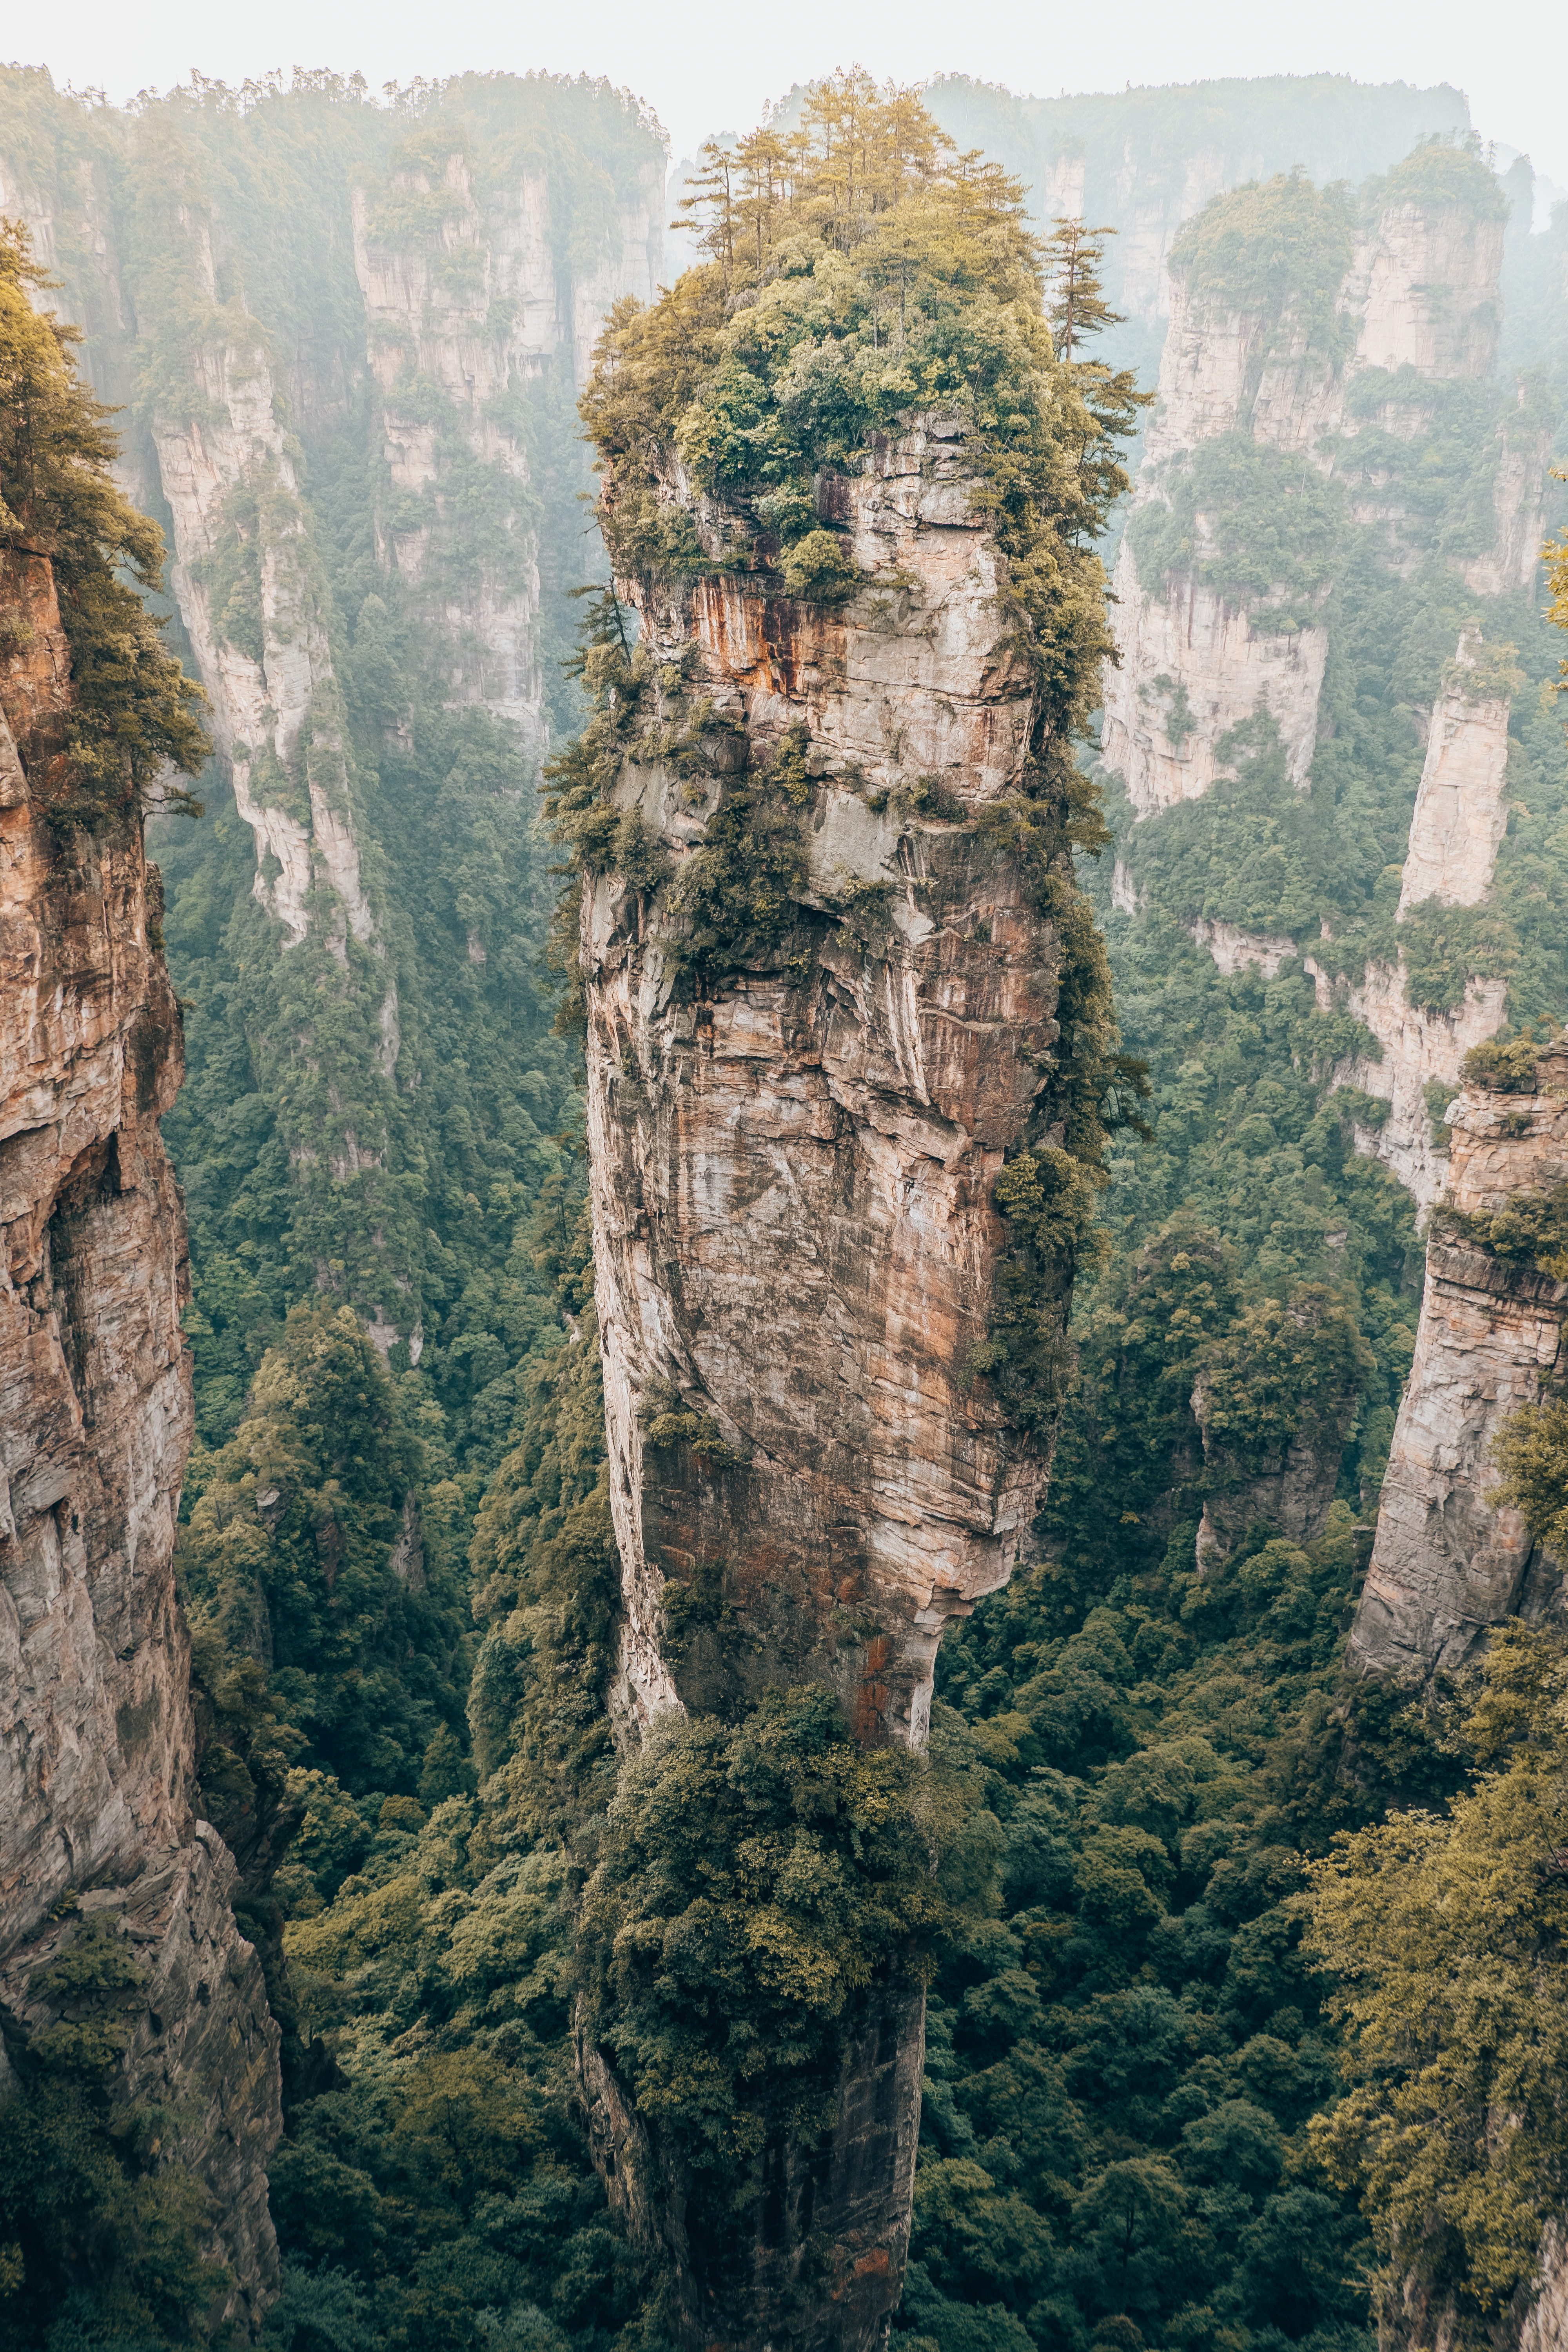 zhangjiajie national park in china where the movie avatar was inspired from